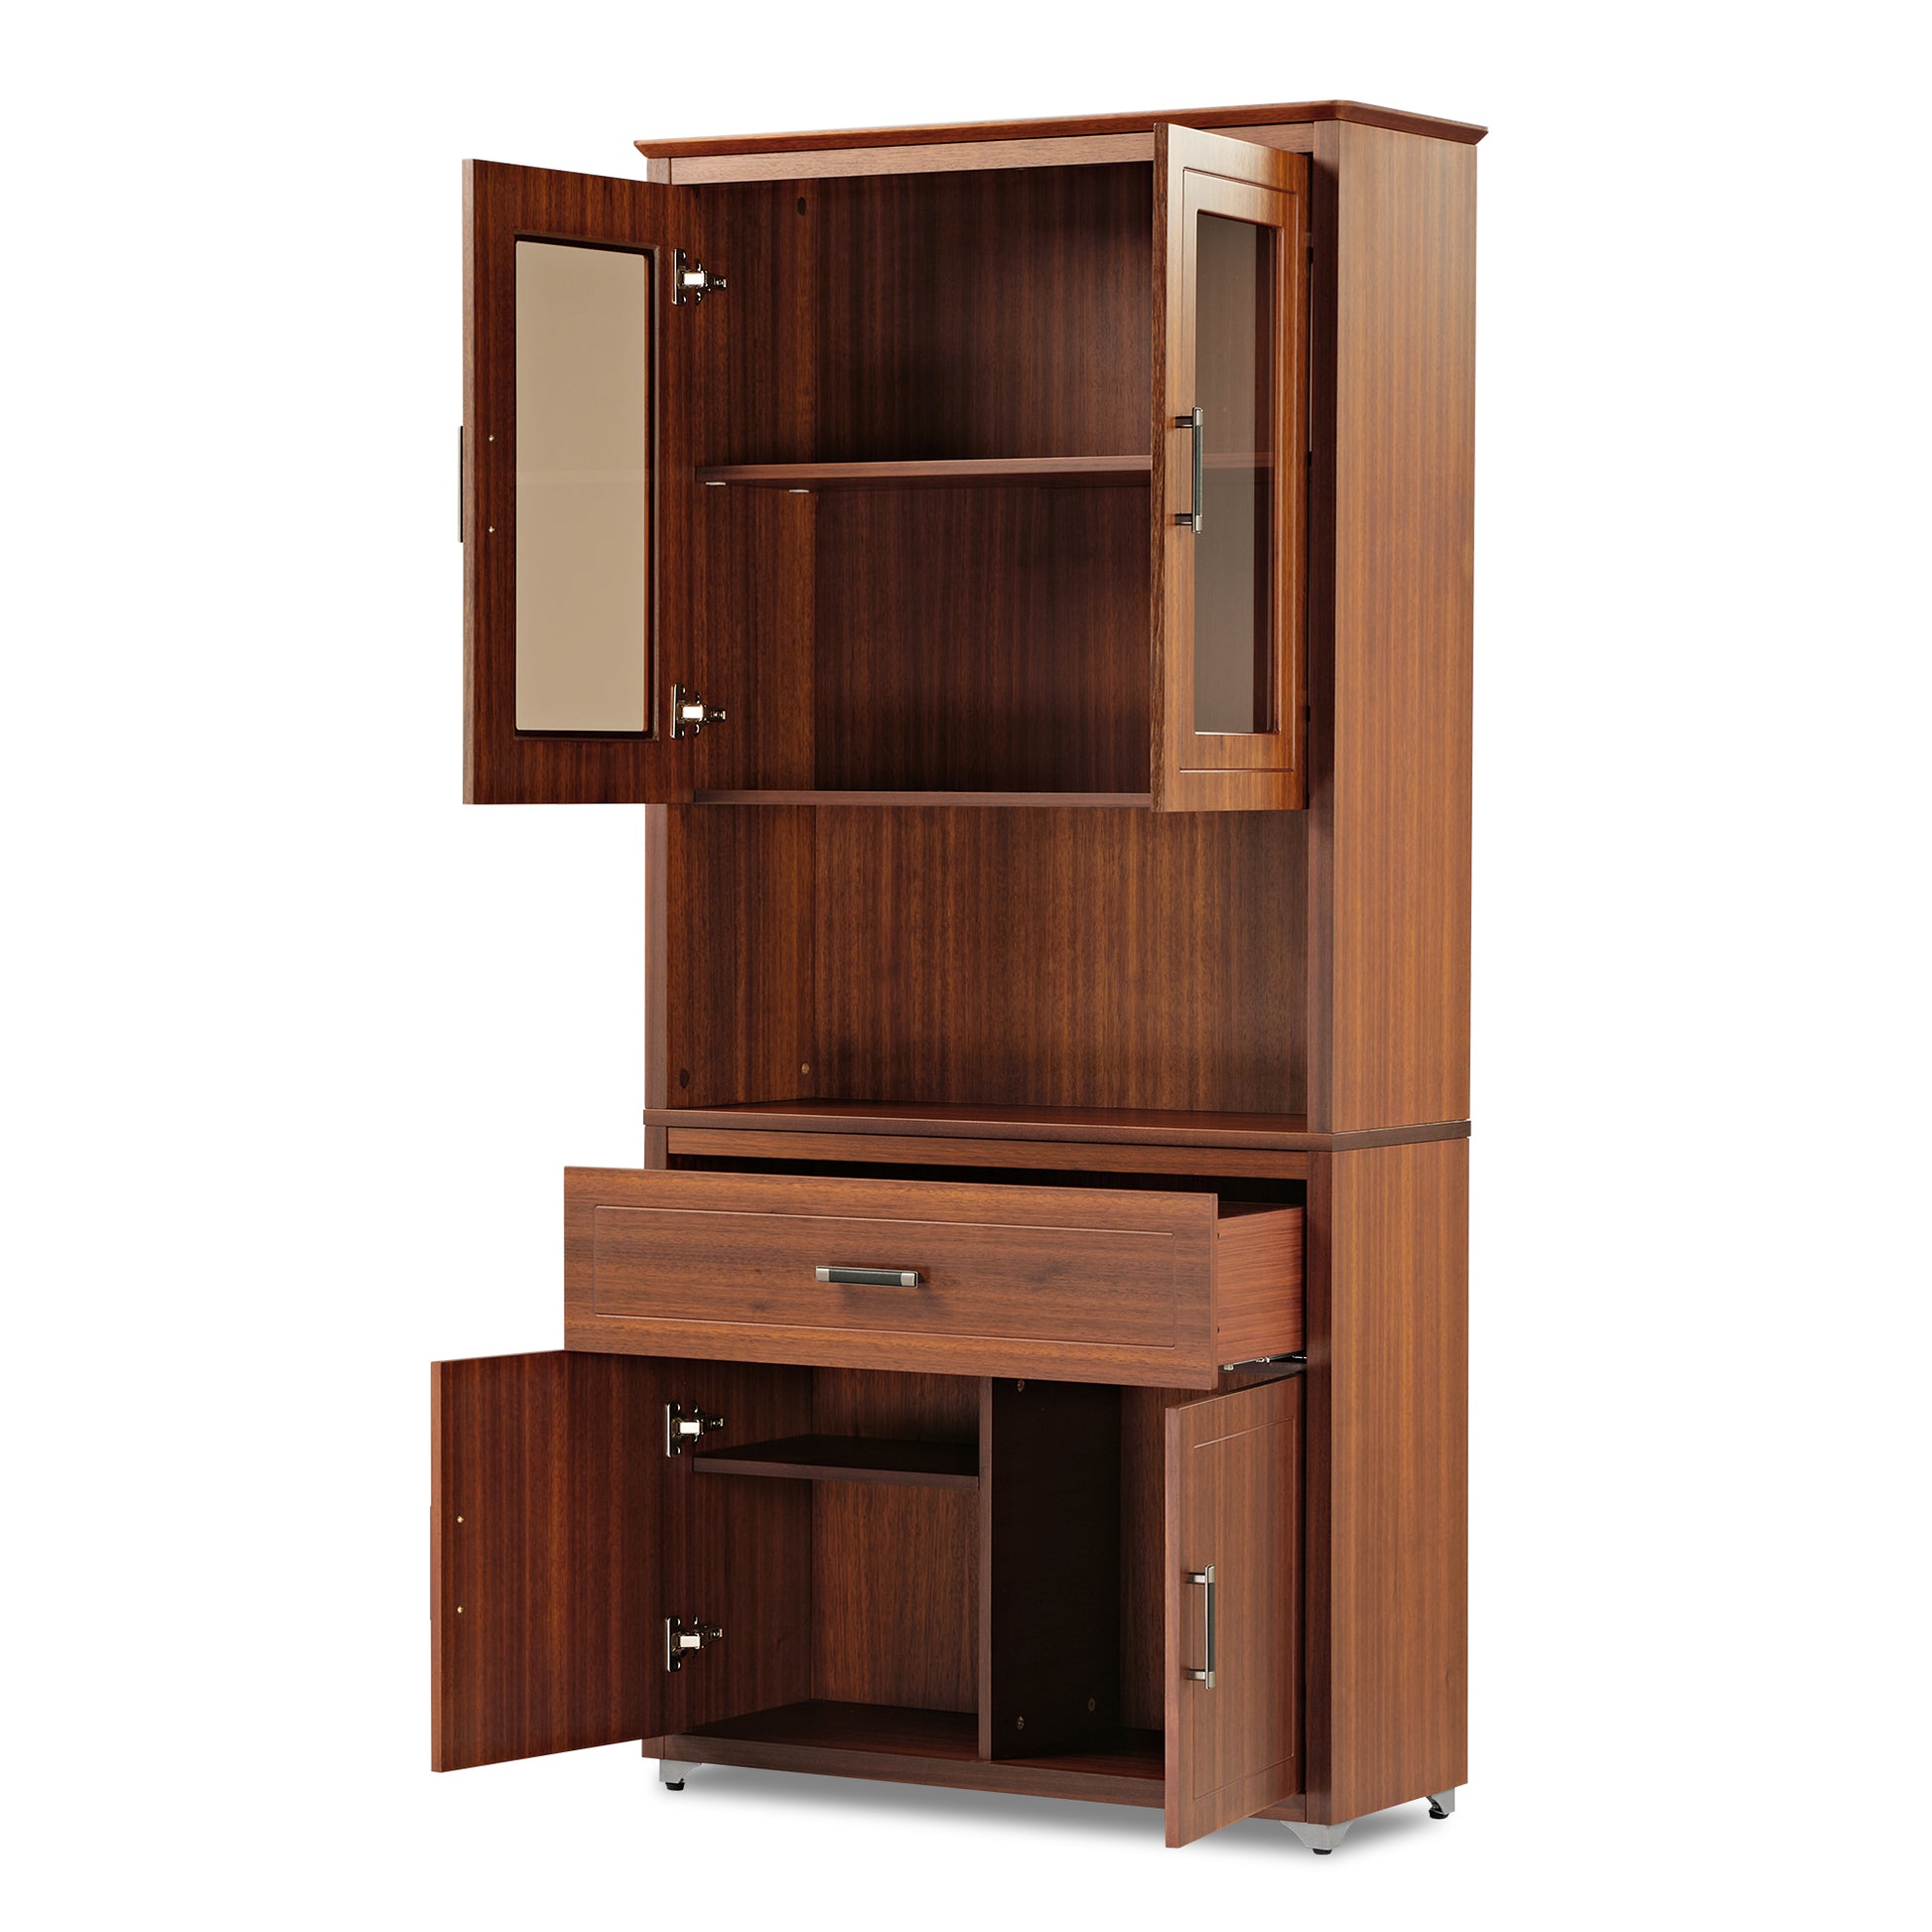 Executive Ark Collection, 72 inch Storage Cabinet Bookshelf with Doors, Walnut Open Display Image